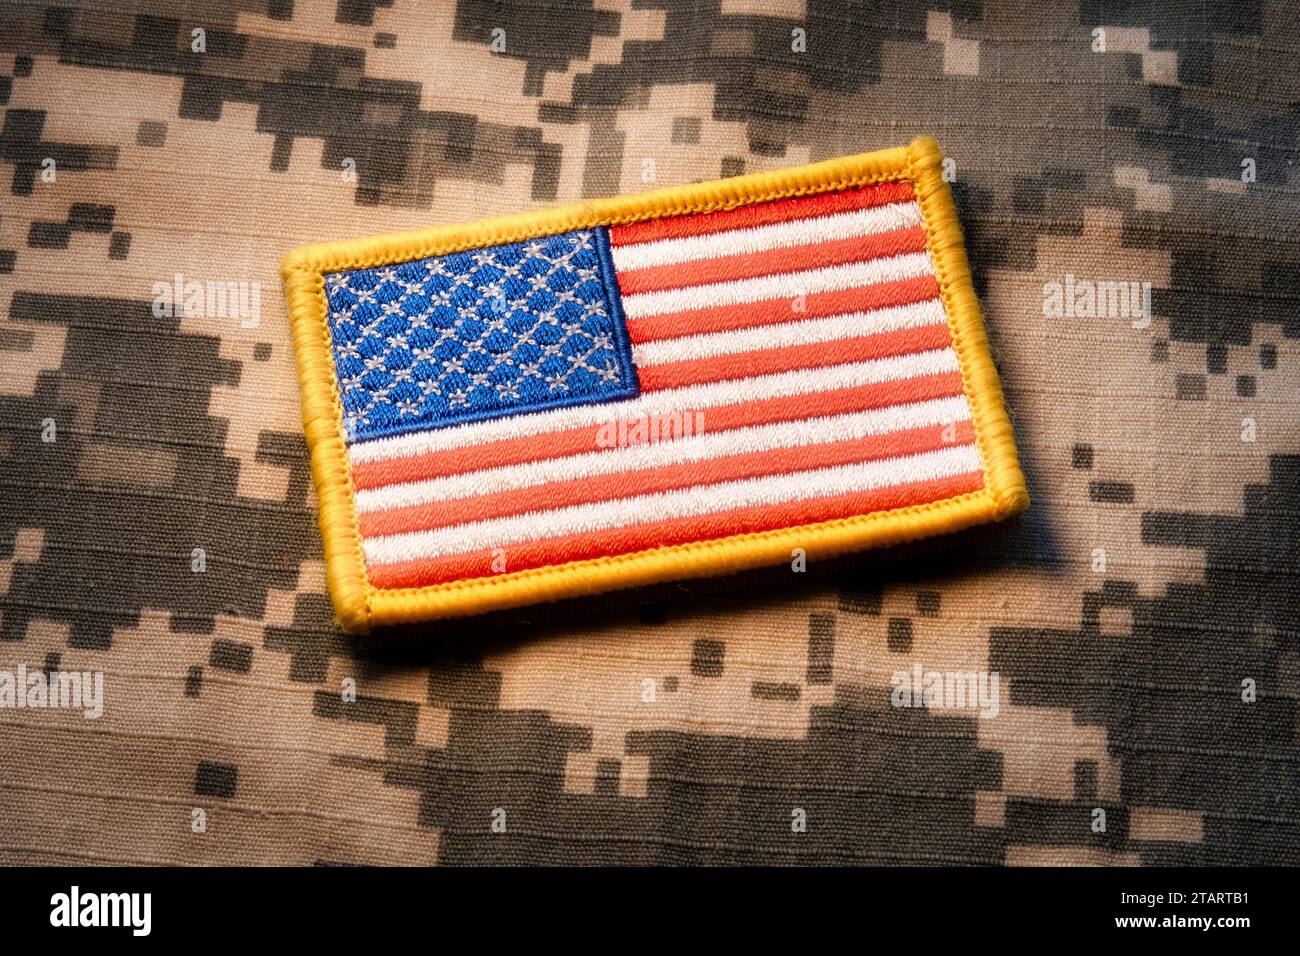 United States Assaulting Flag Patch